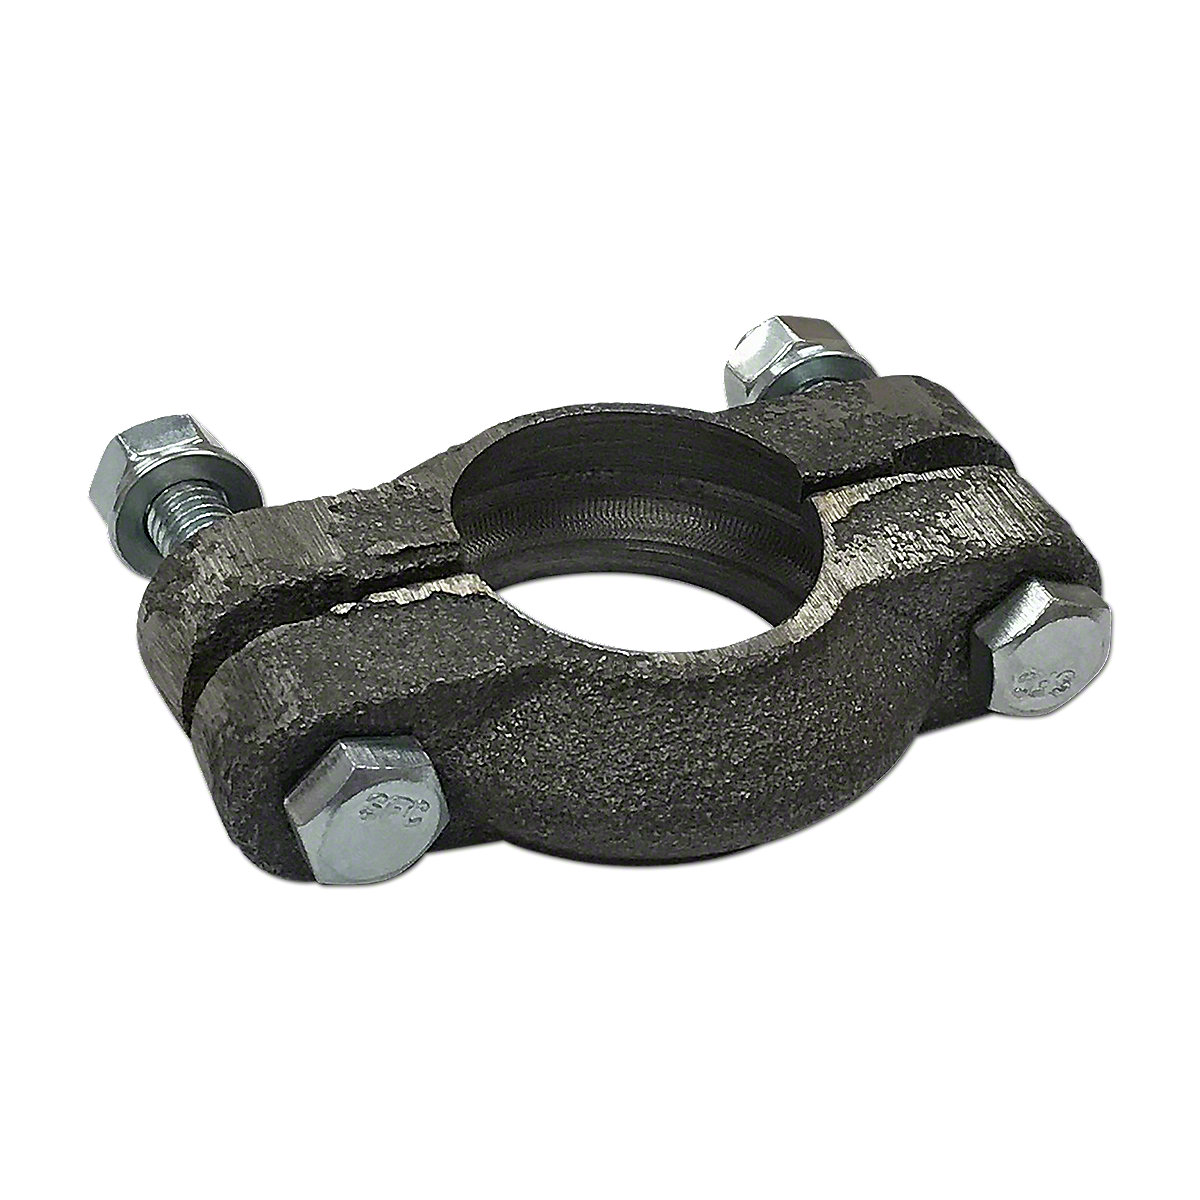 Cub Exhaust Manifold Clamp For Underslung Exhaust